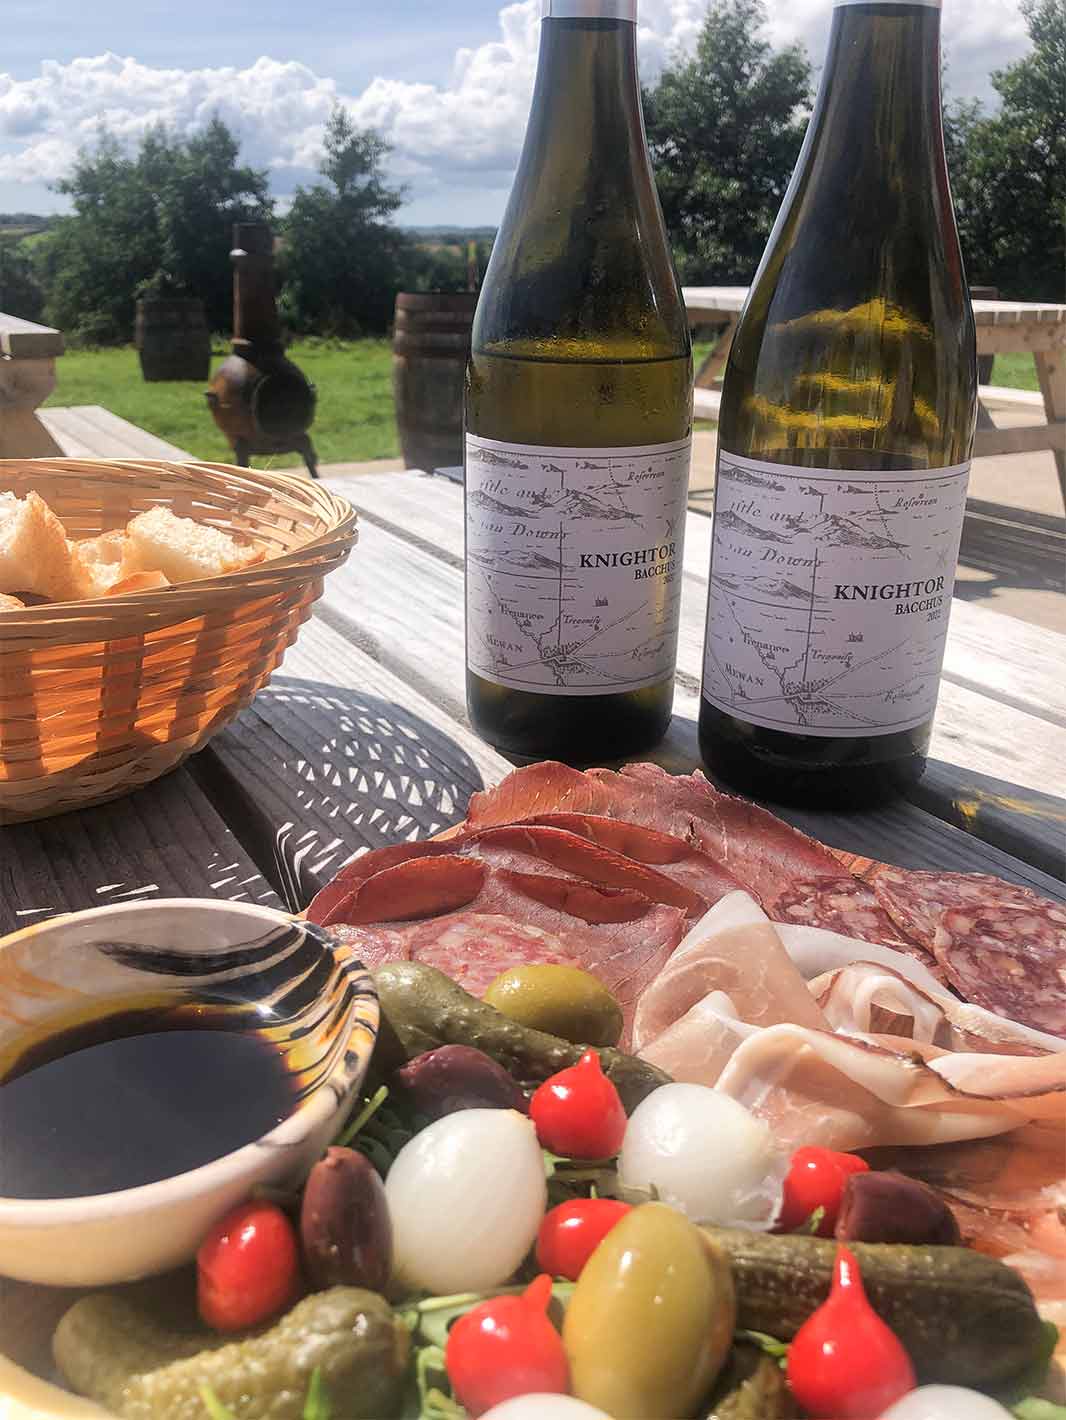 Bottles of Knightor wine and a charcuterie spread at Knightor Vineyard in Portscatho, the Roseland